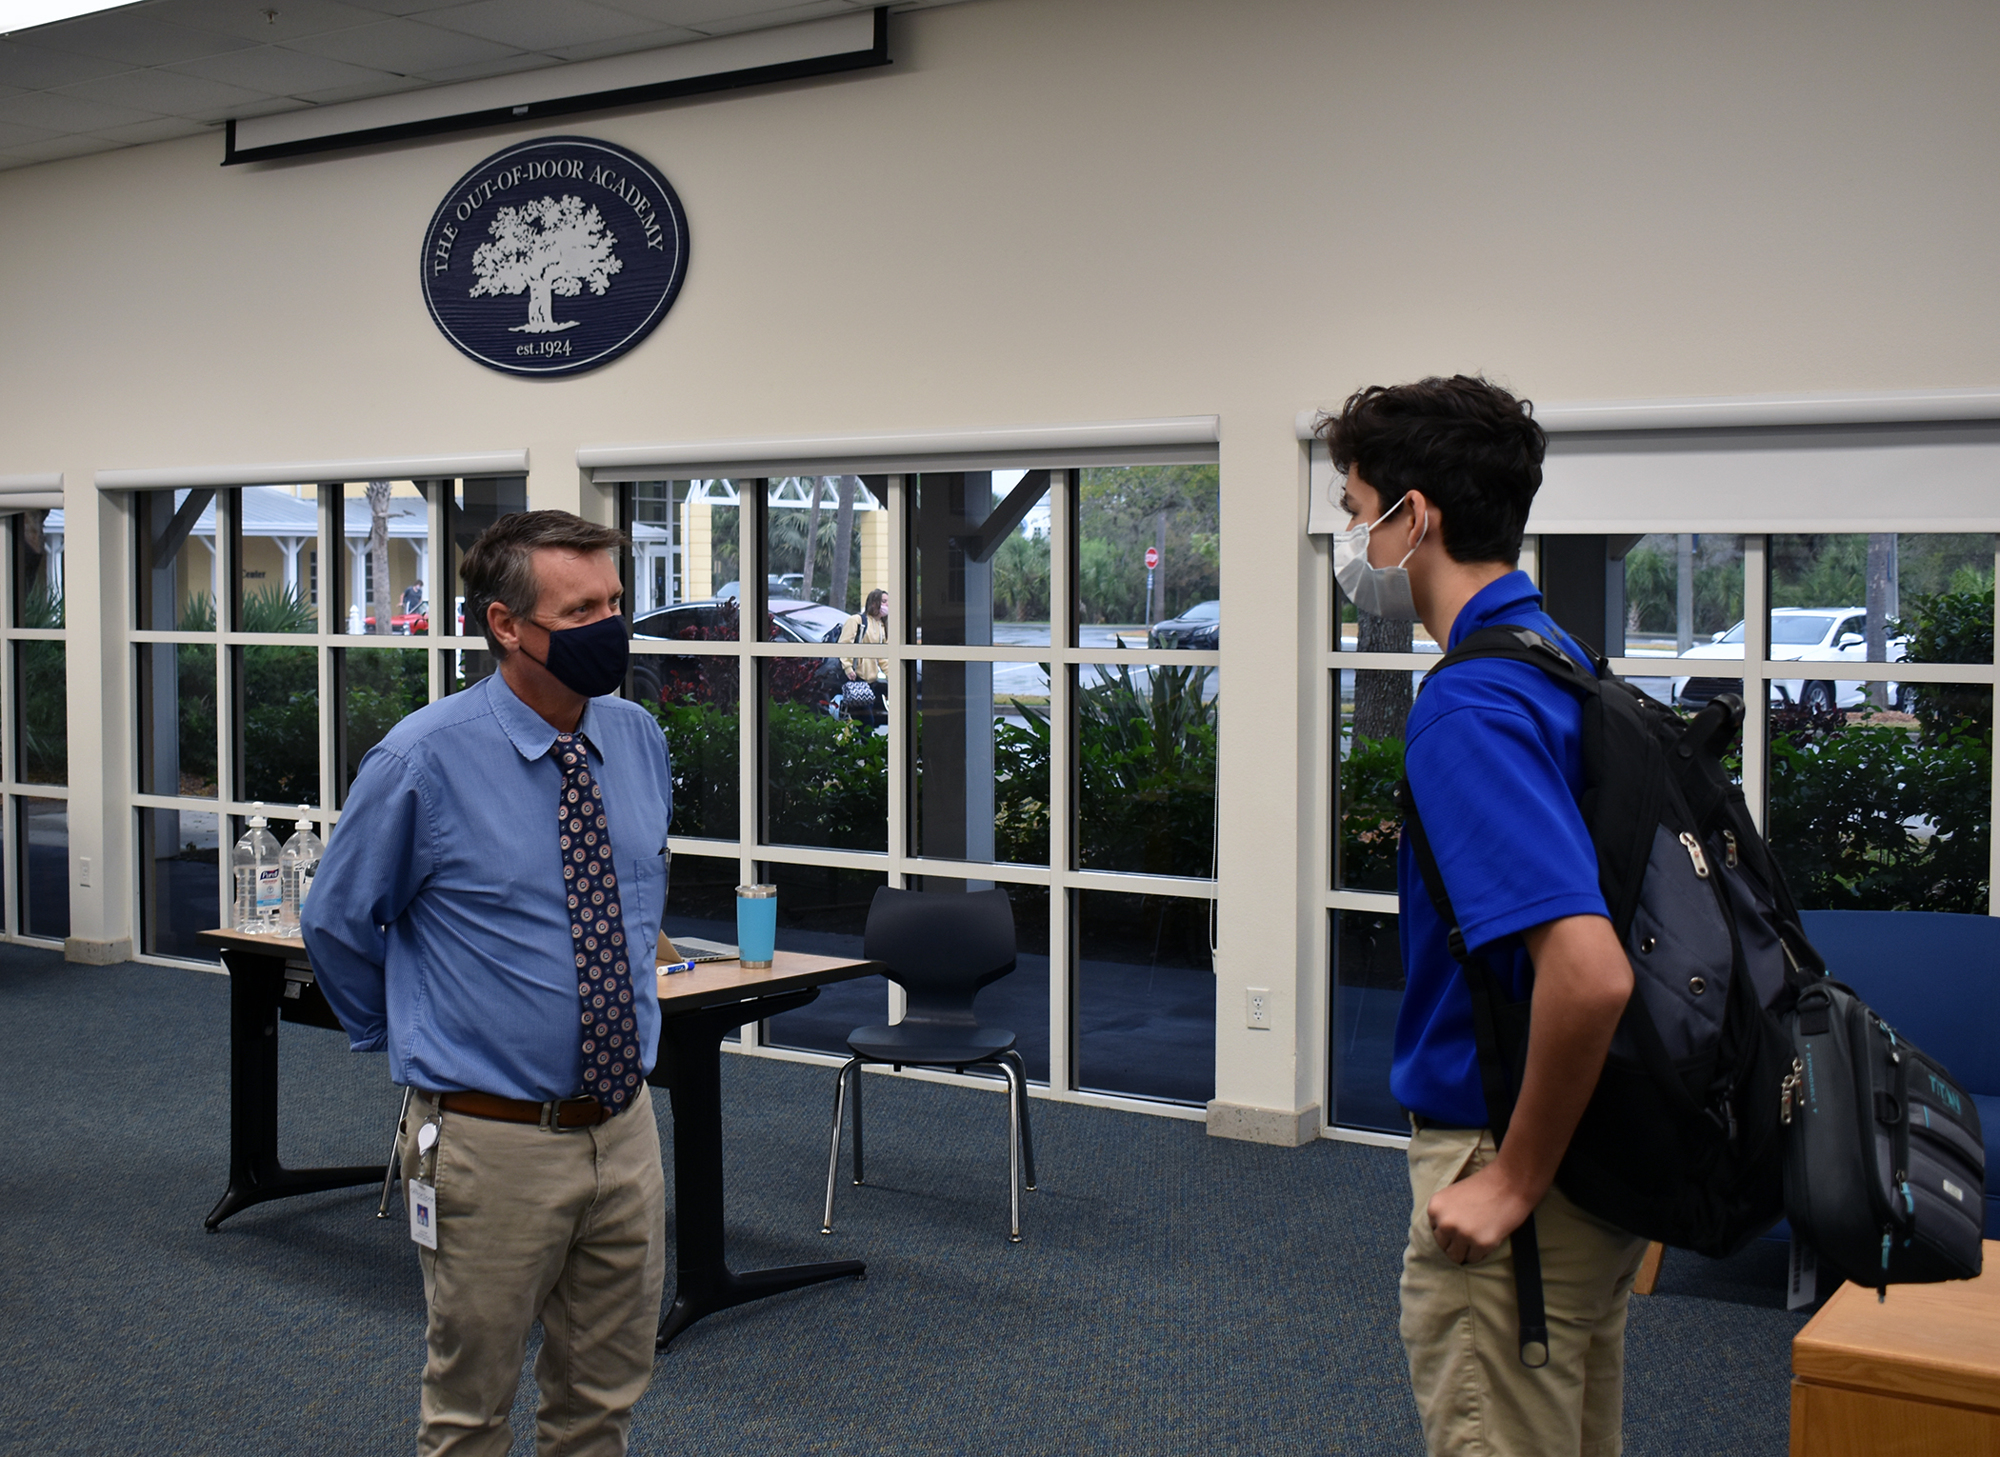 Every morning, Sean Ball, the head of upper school, chats with students like Joseph Clarke as they start the school day. Courtesy photo.